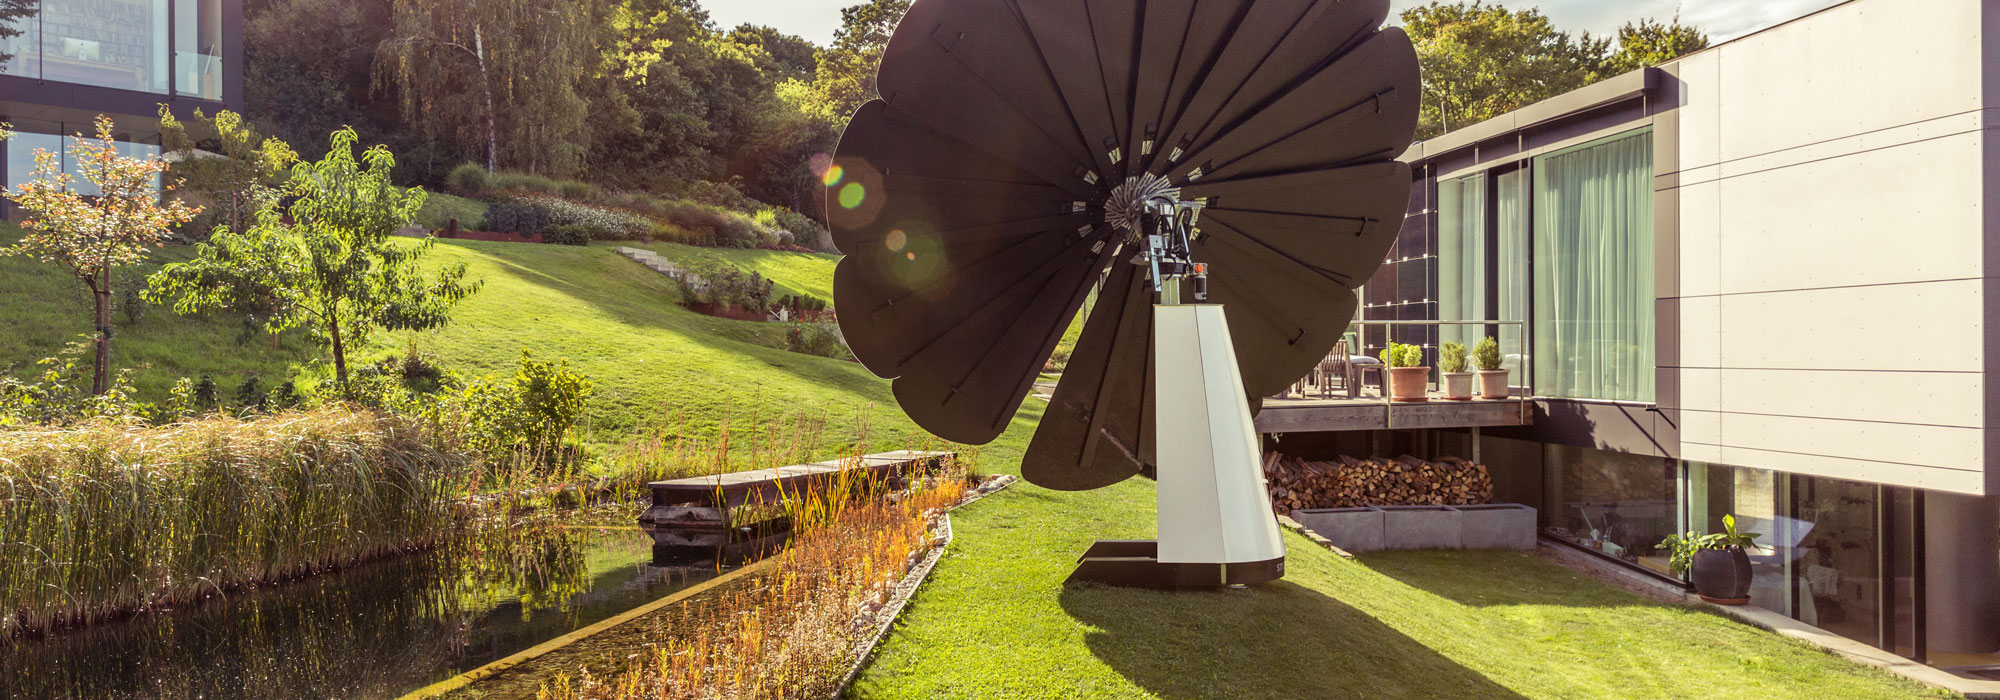 A SmartFlower Solar Panel Sits in the Yard Beside a Small Pond Between Two Houses